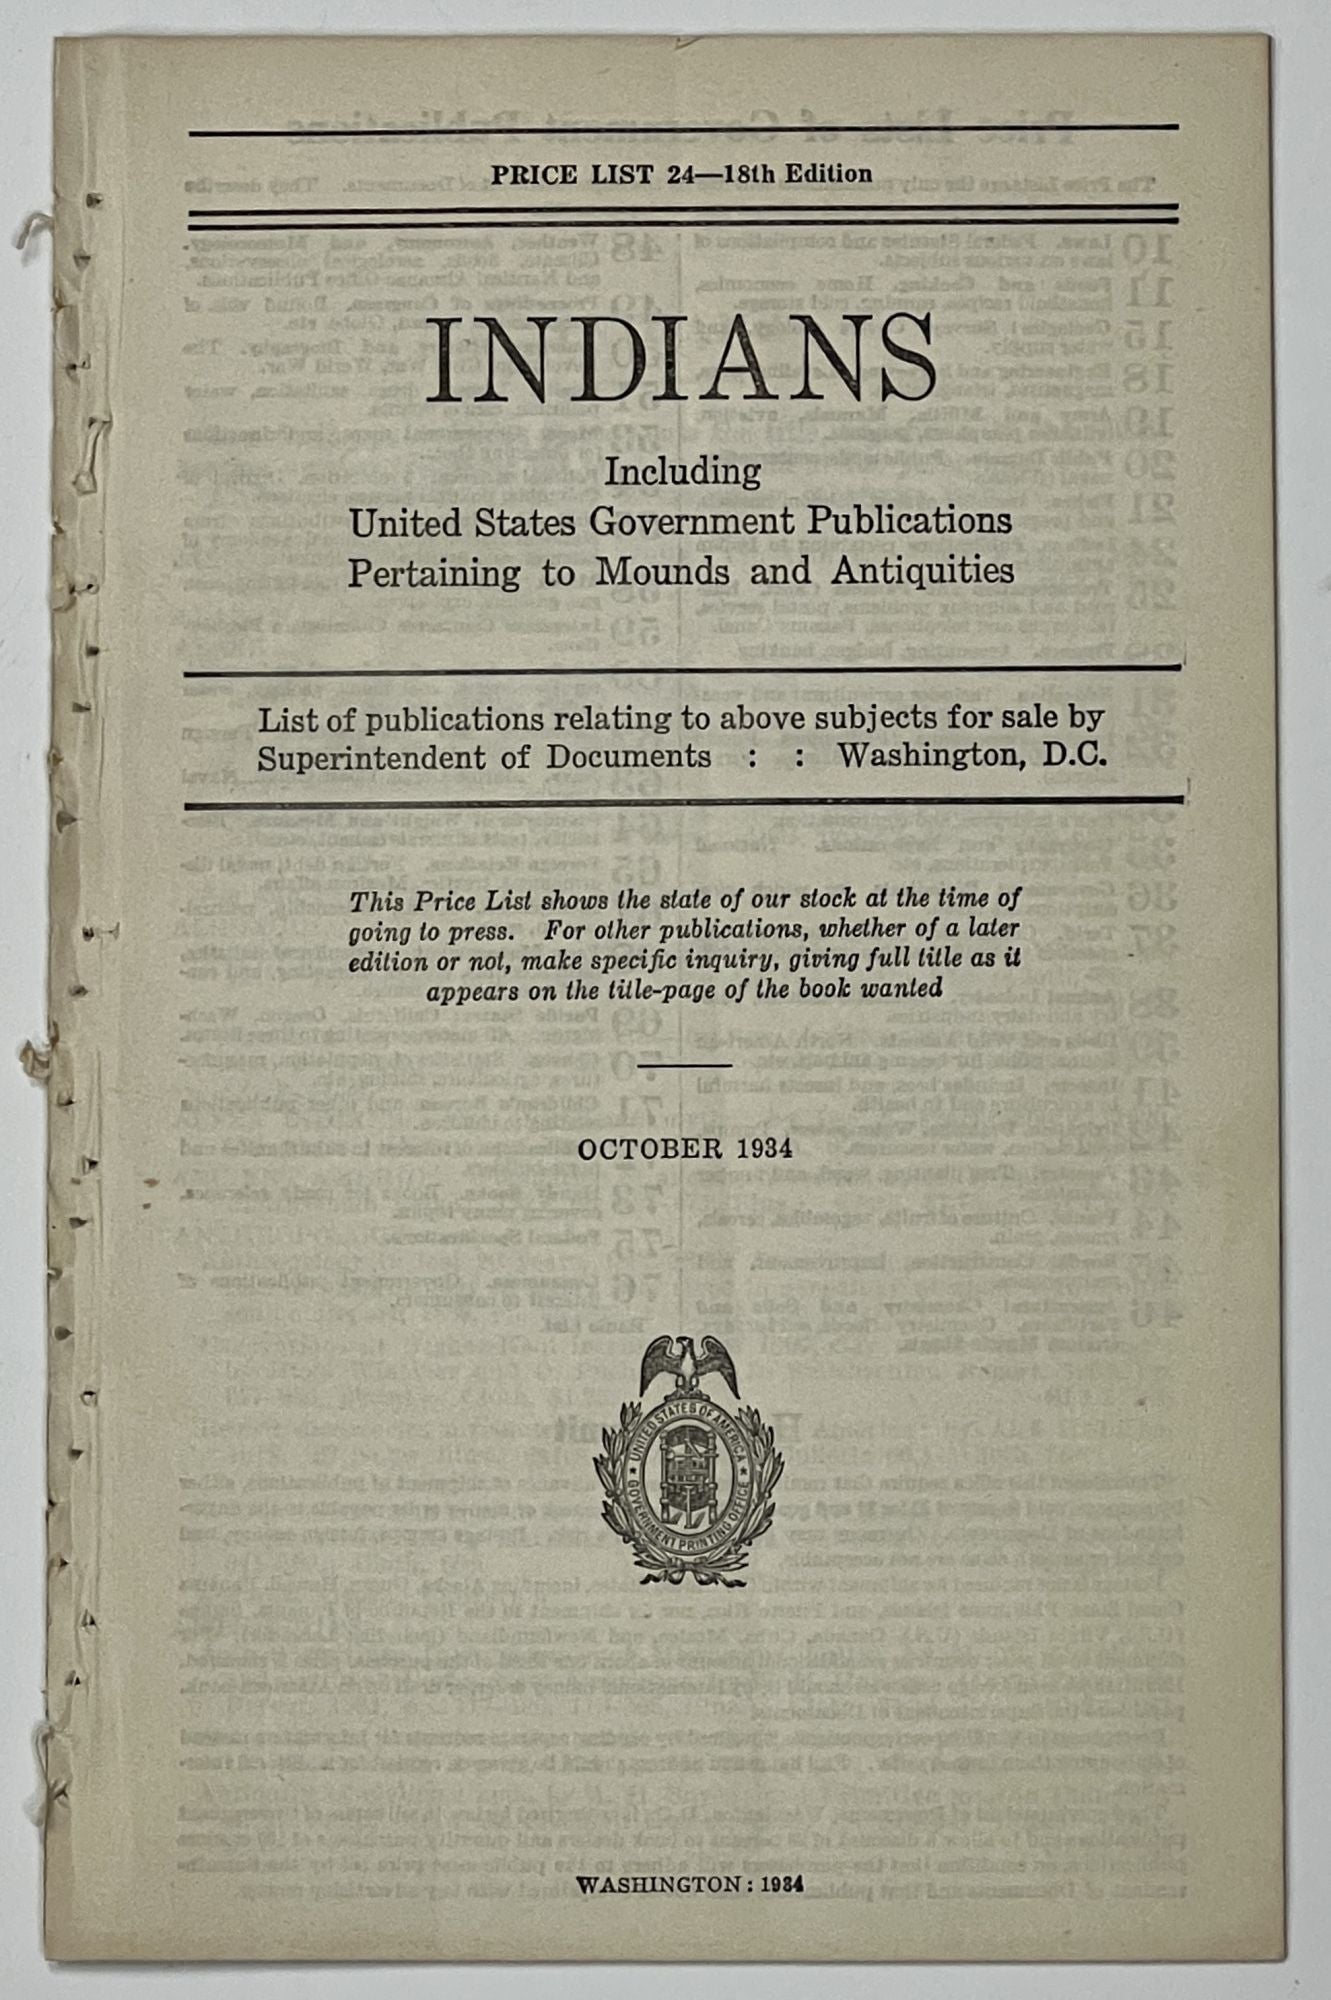 [Book Catalogue] - INDIANS. Including United States Government Publications Pertaining to Mounds and Antiquities. List of publications relating to above subjects for sale by Superintendent of Documents. Price List 24 - 18th Edition